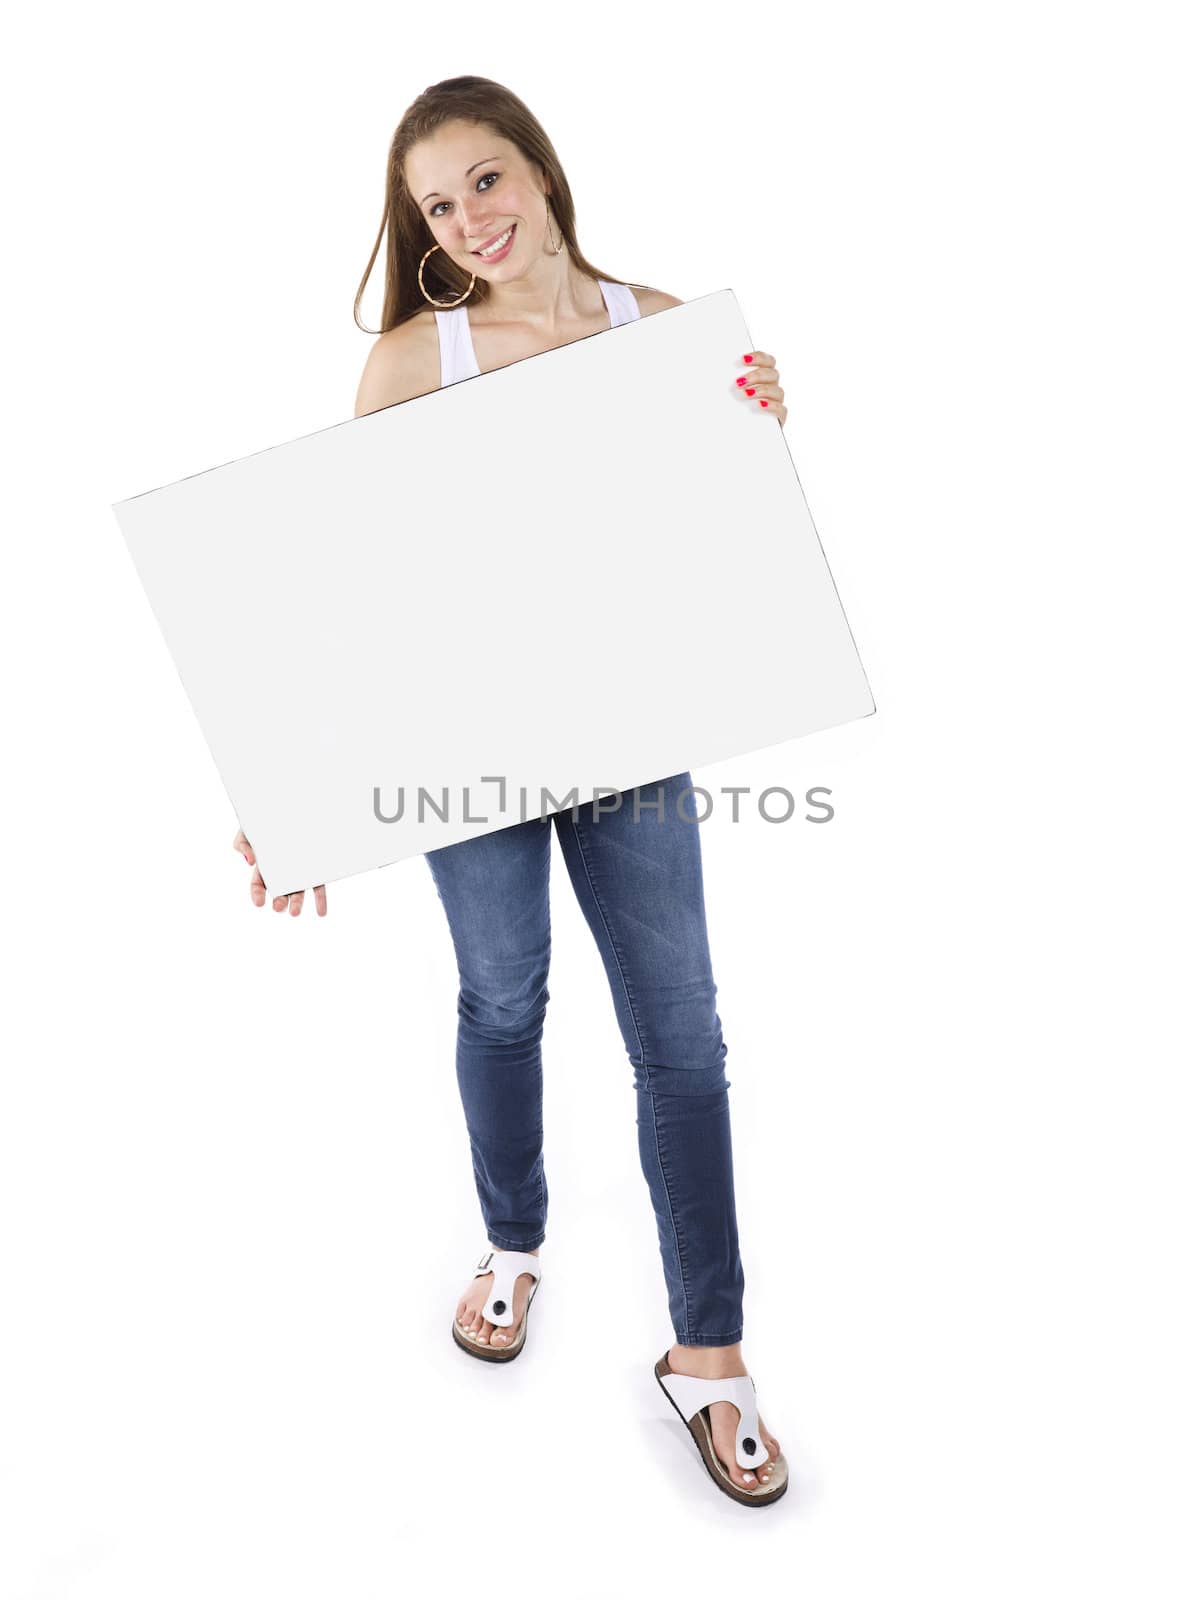 View of a teenage girl holding a blank placard over white background.